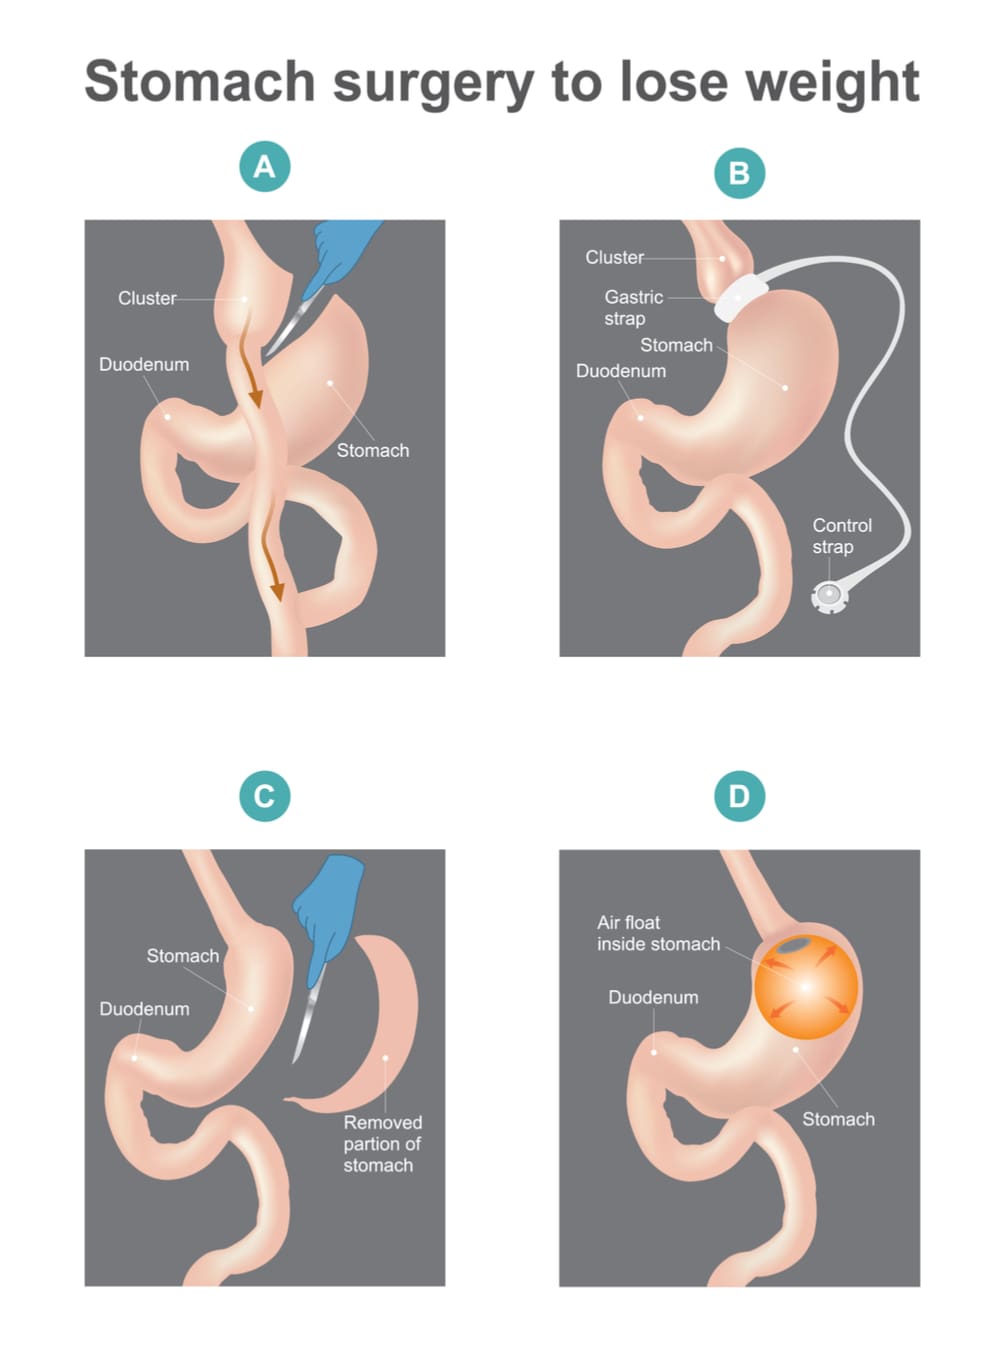 Different types of bariatric surgery procedures including sleeve gastrectomy, adjustable gastric banding, etc..